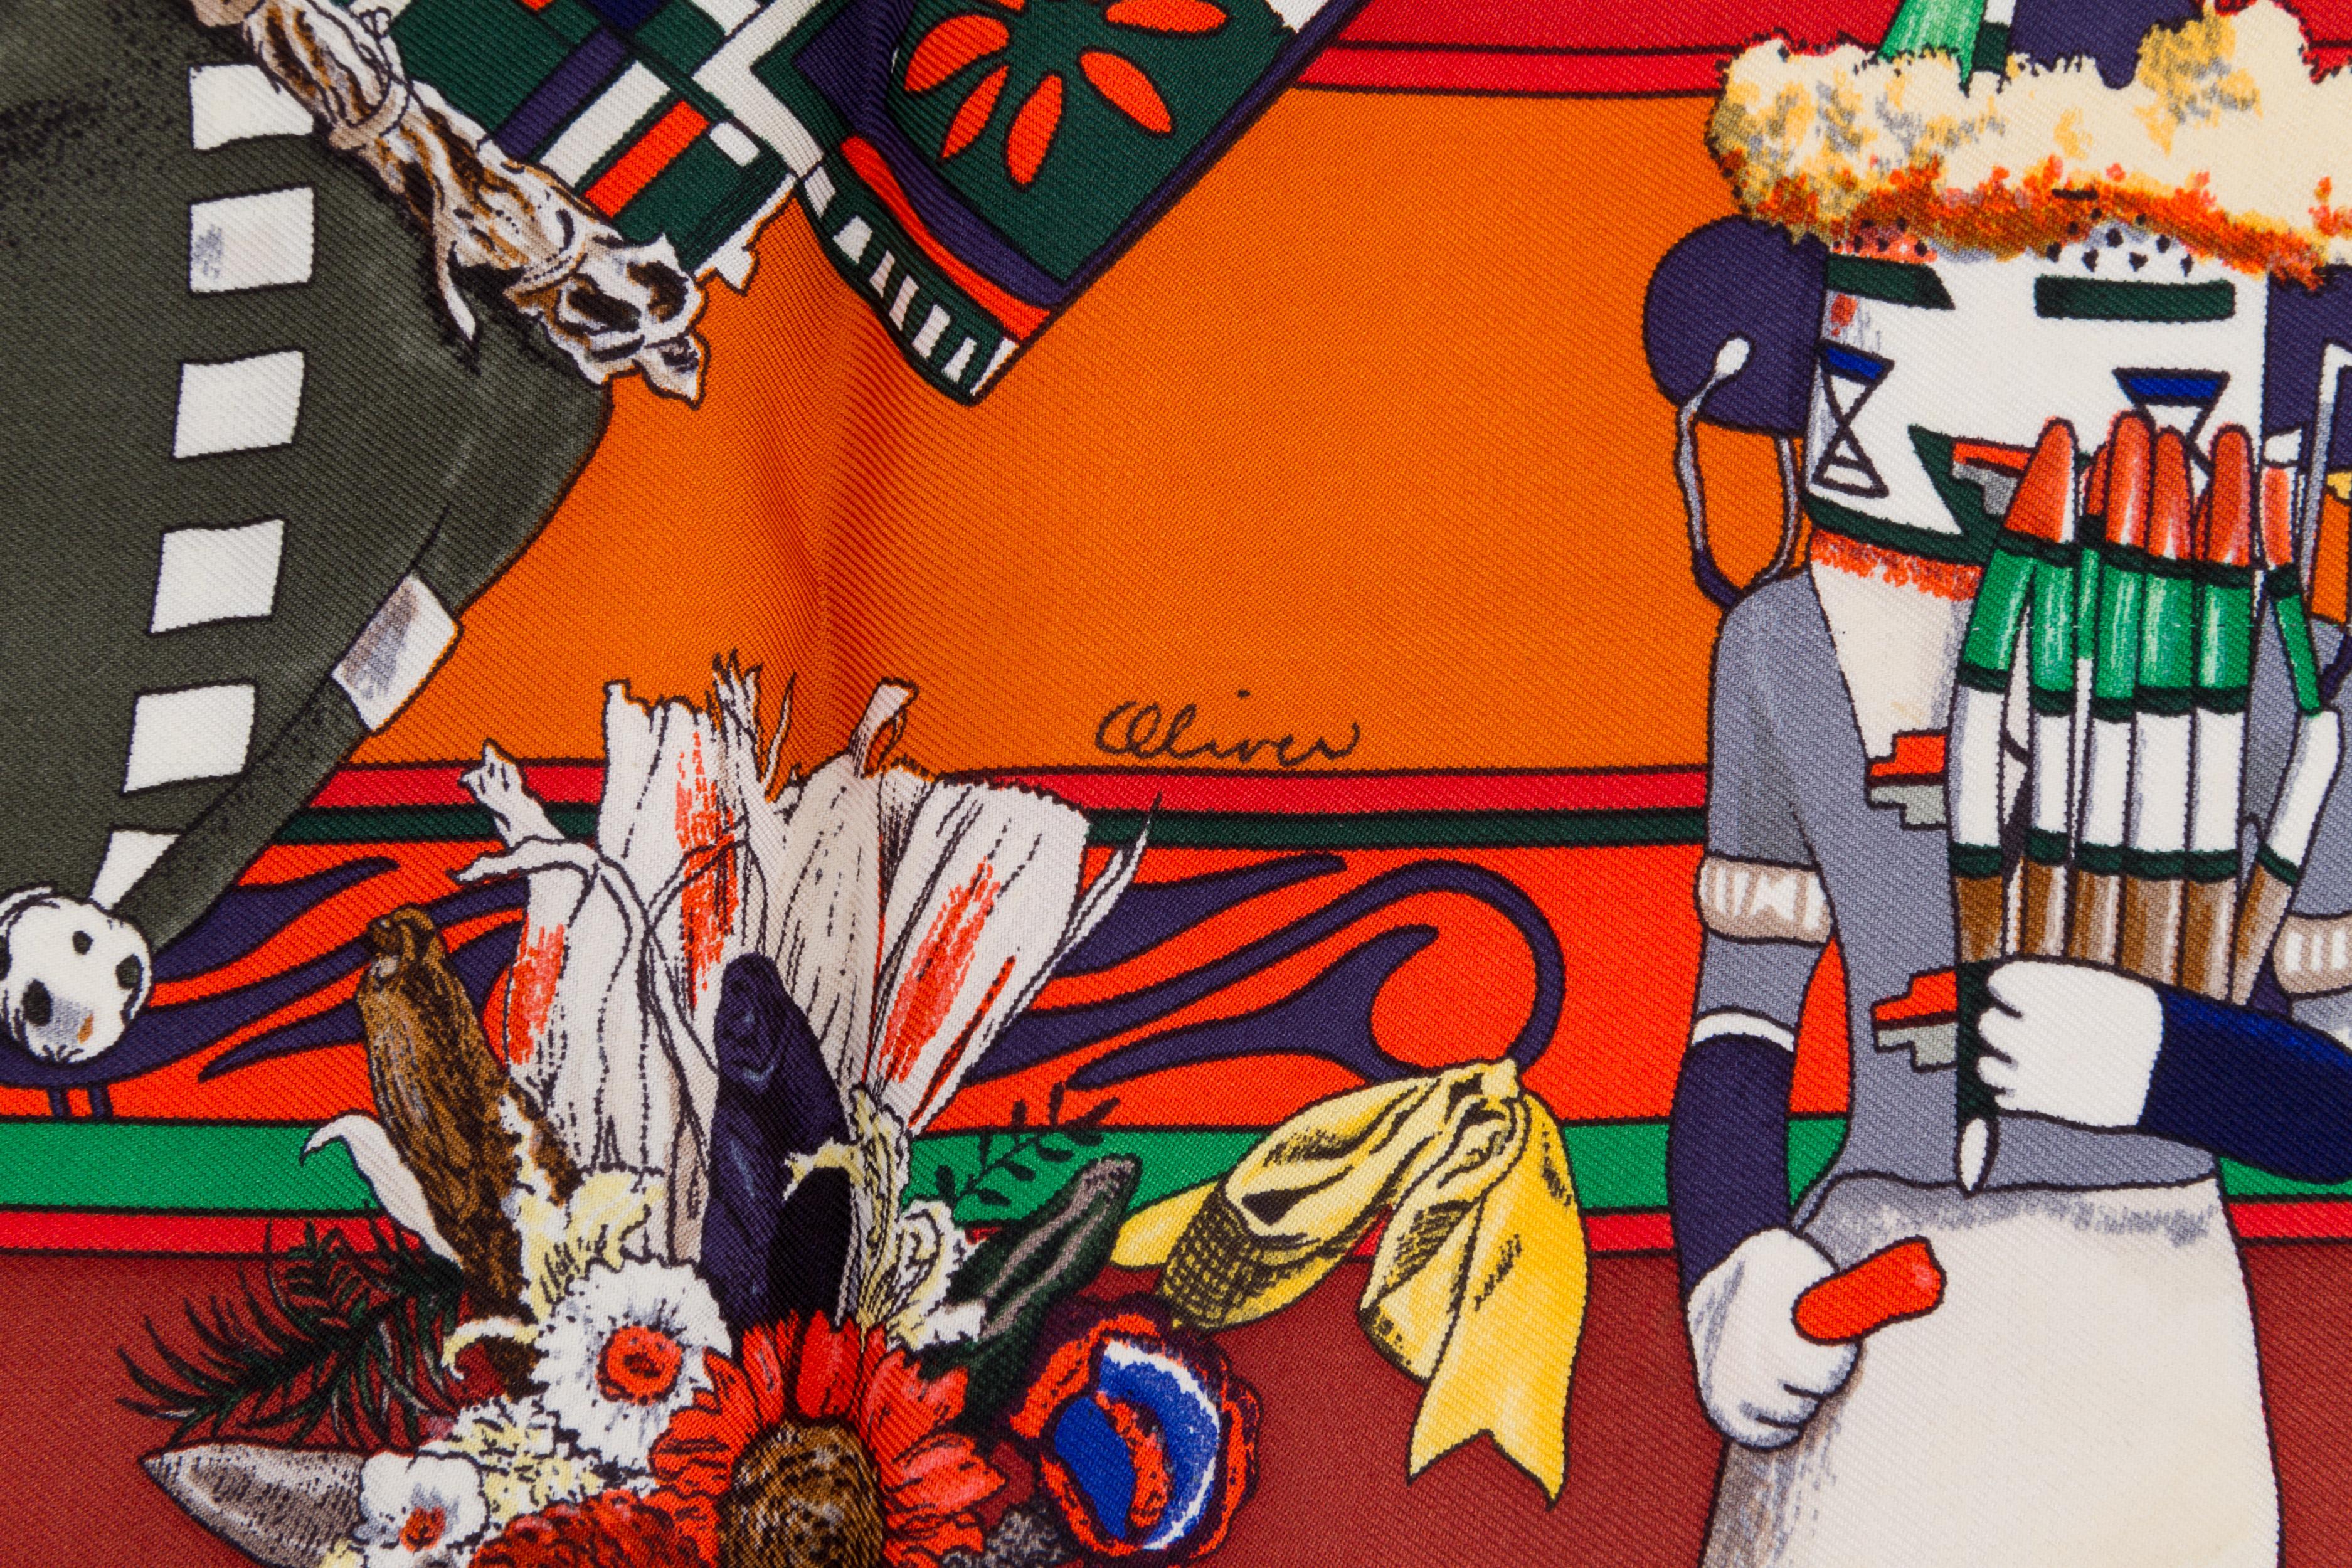 Hermès rust silk twill Kachinas scarf designed by Kermit Oliver. Hand-rolled edges. Box included. 